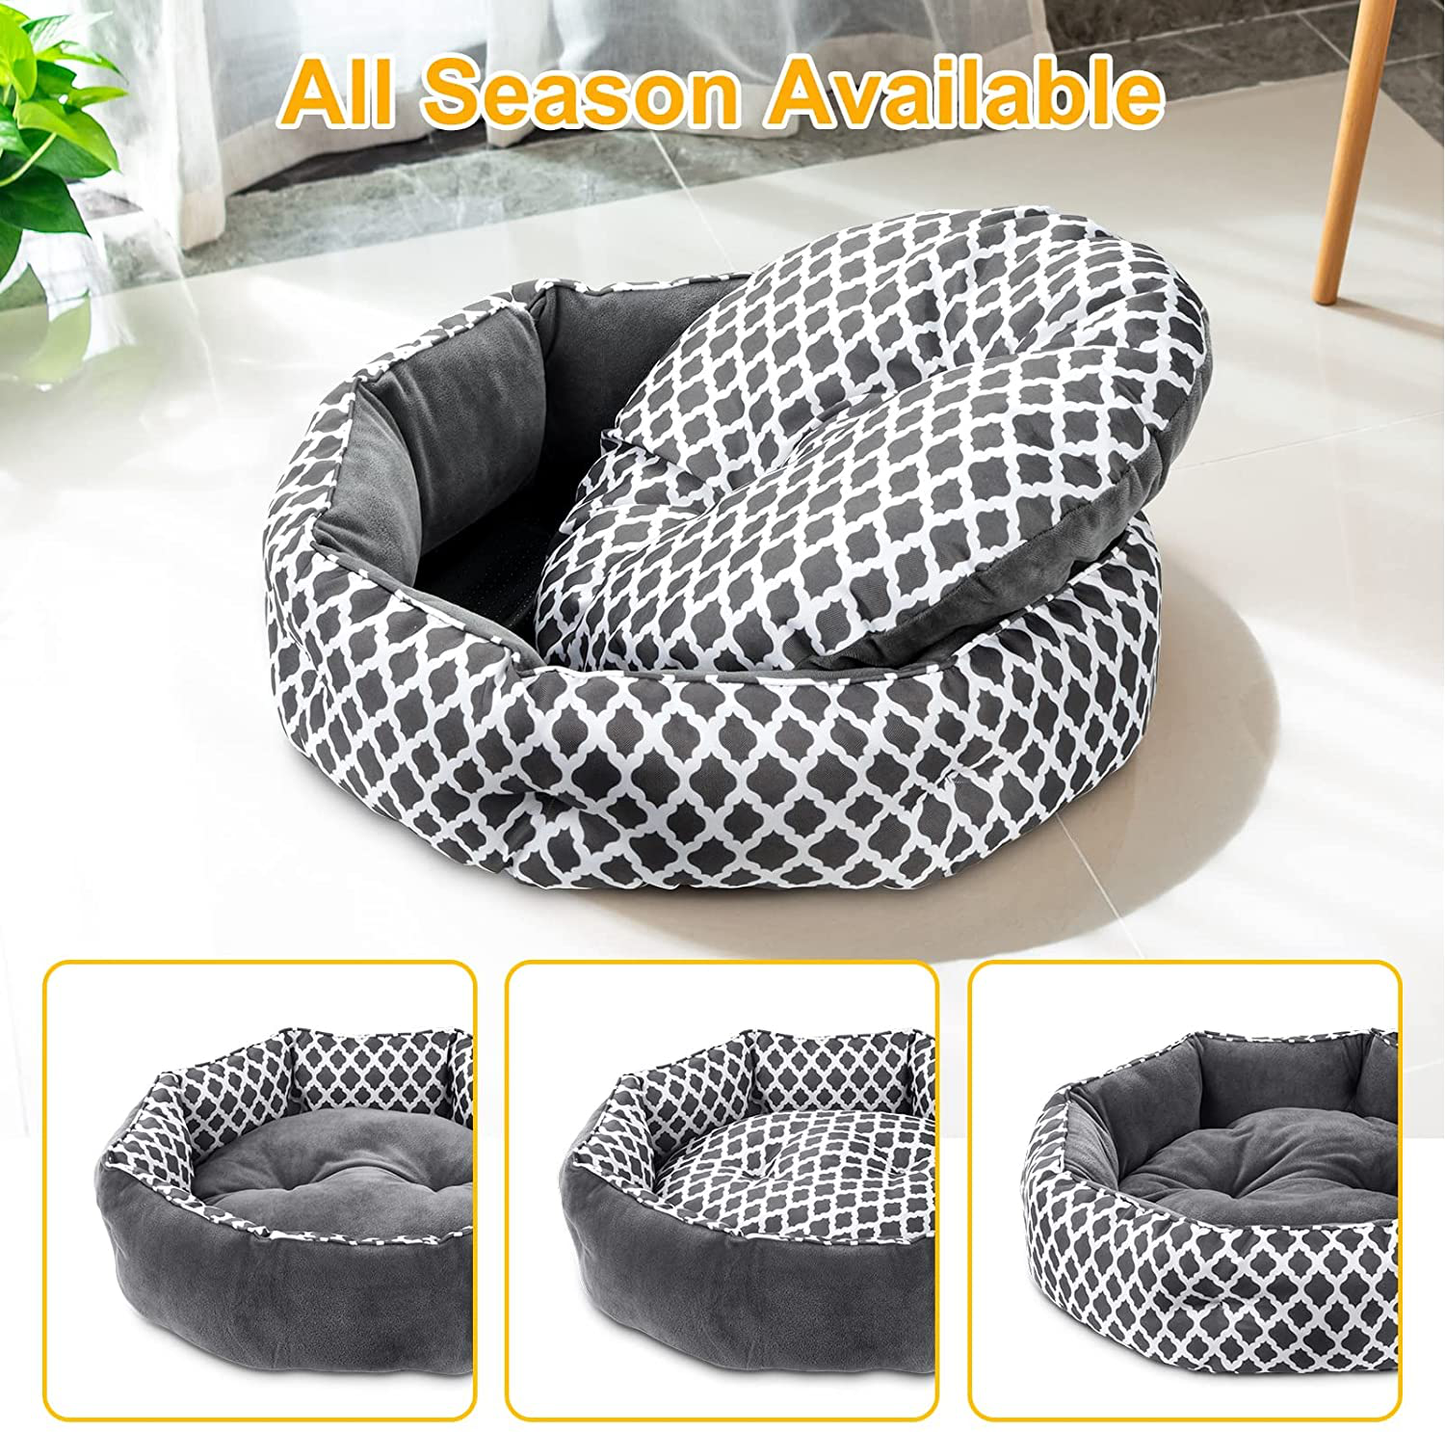 JOYO Cat Bed for Indoor Cat, 20 Inch Cat Bed Machine Washable with Waterproof Non-Slip Bottom, Double-Sided Kitten Plush Cushion Bed for Small Dogs, Soft Flannel round Warming Sofa Bed for Kitty Puppy Animals & Pet Supplies > Pet Supplies > Cat Supplies > Cat Beds JOYO   